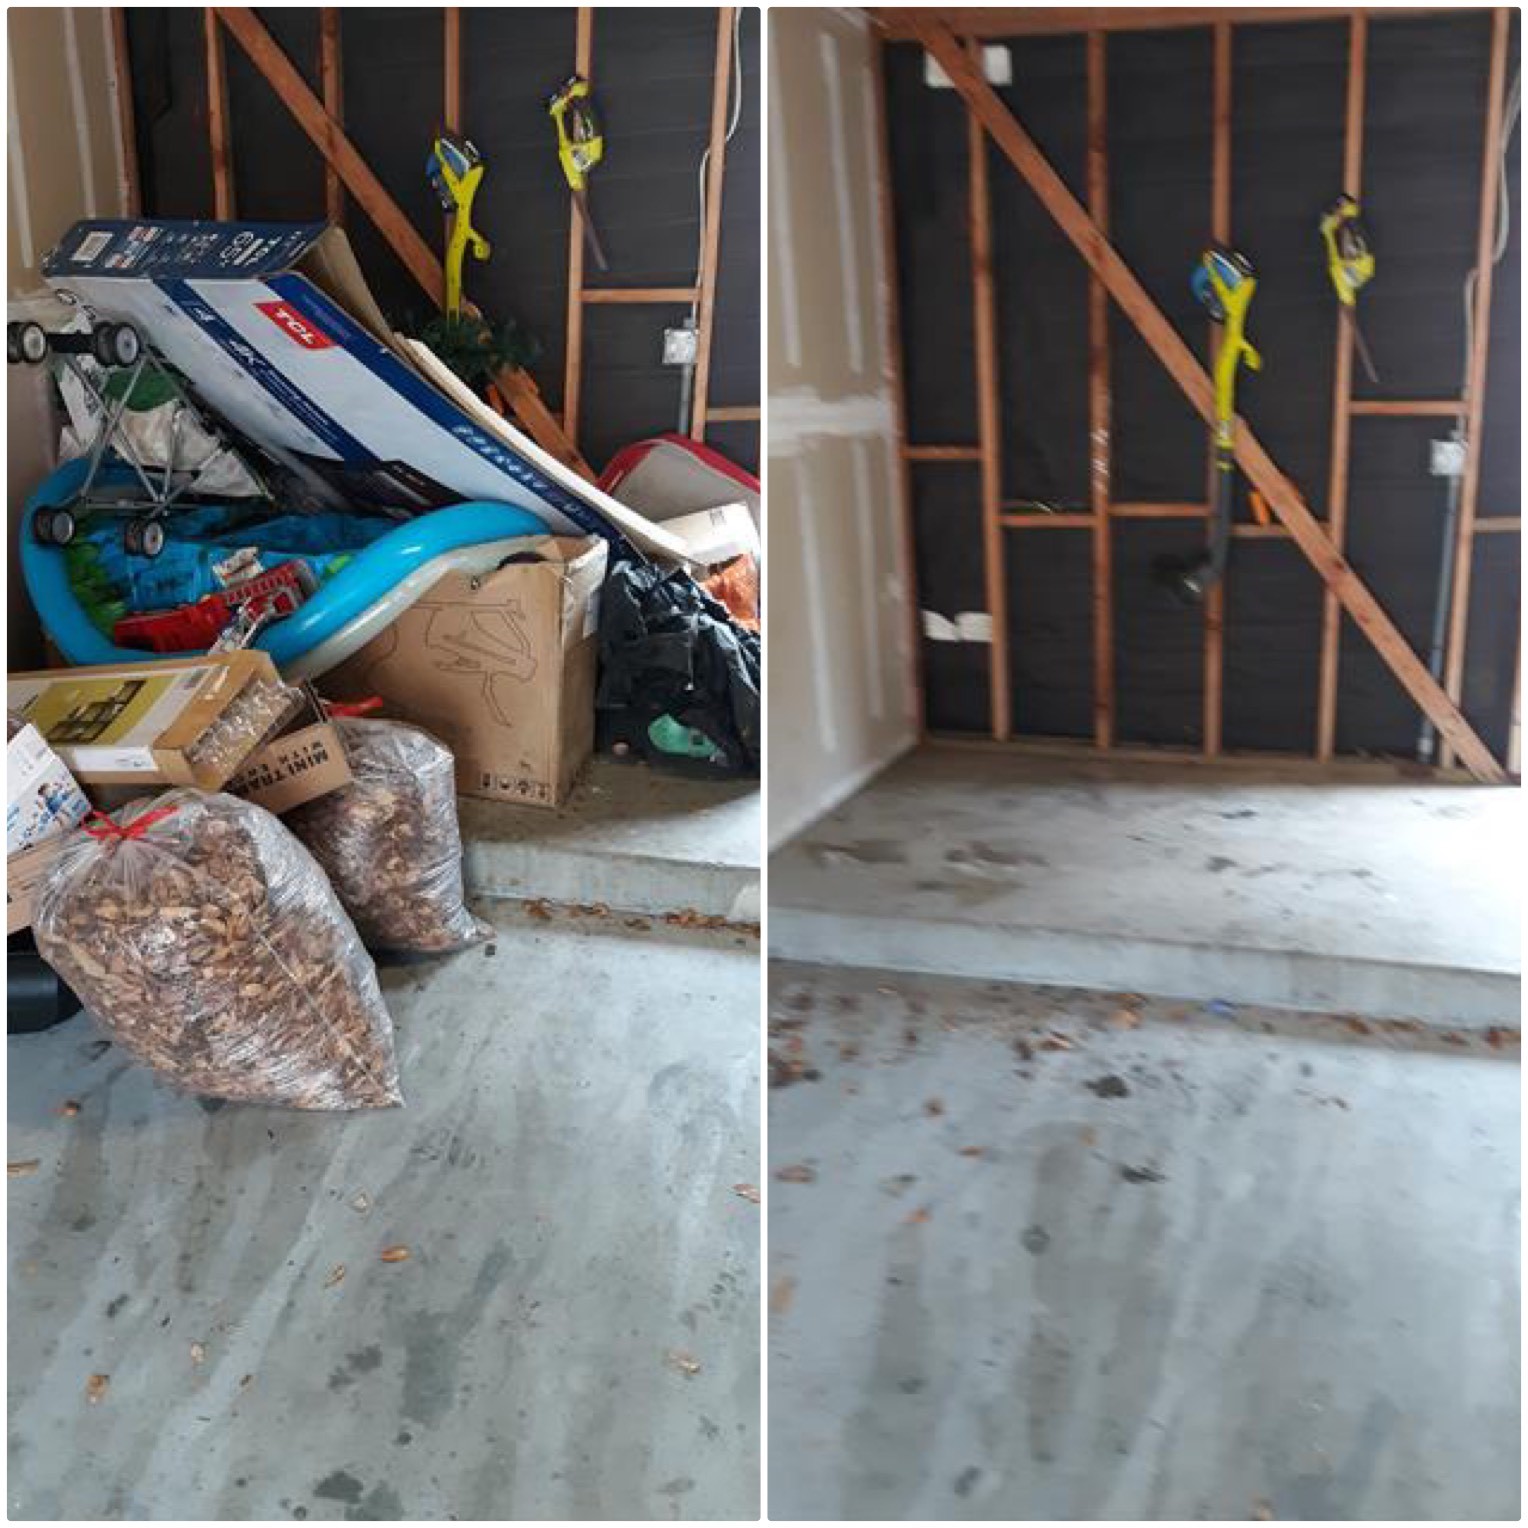 Before and after photo from a recent Junk King trash removal. We haul just about anything from furniture to construction debris and all the miscellaneous items in between. Call Junk King today for your next junk hauling job!